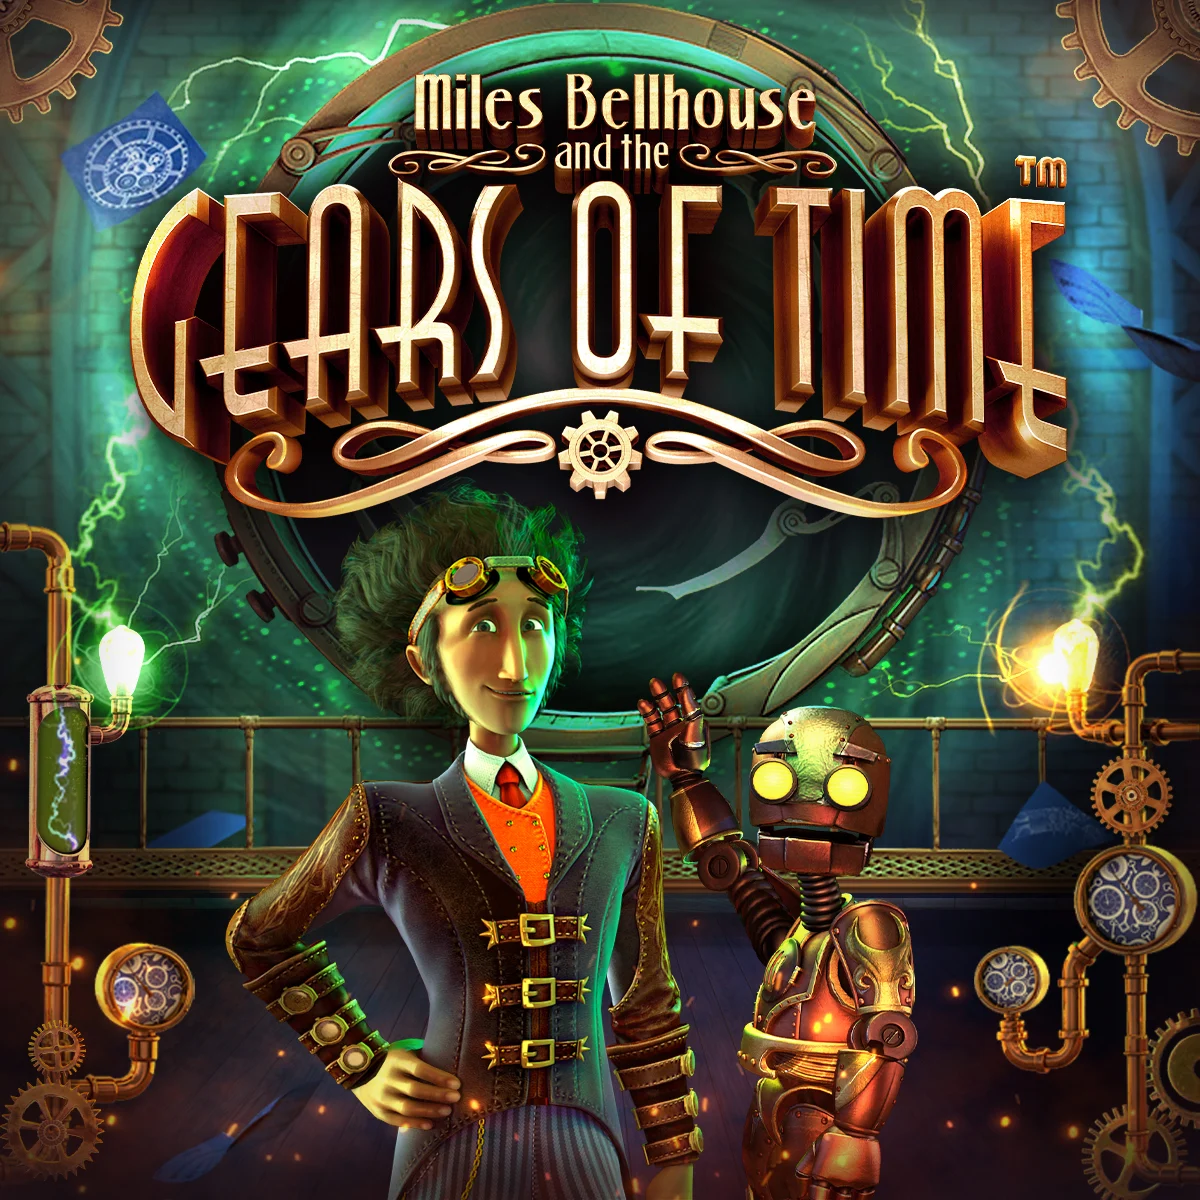 Play Miles Bellhouse and the Gears of Time on Starcasinodice.be online casino